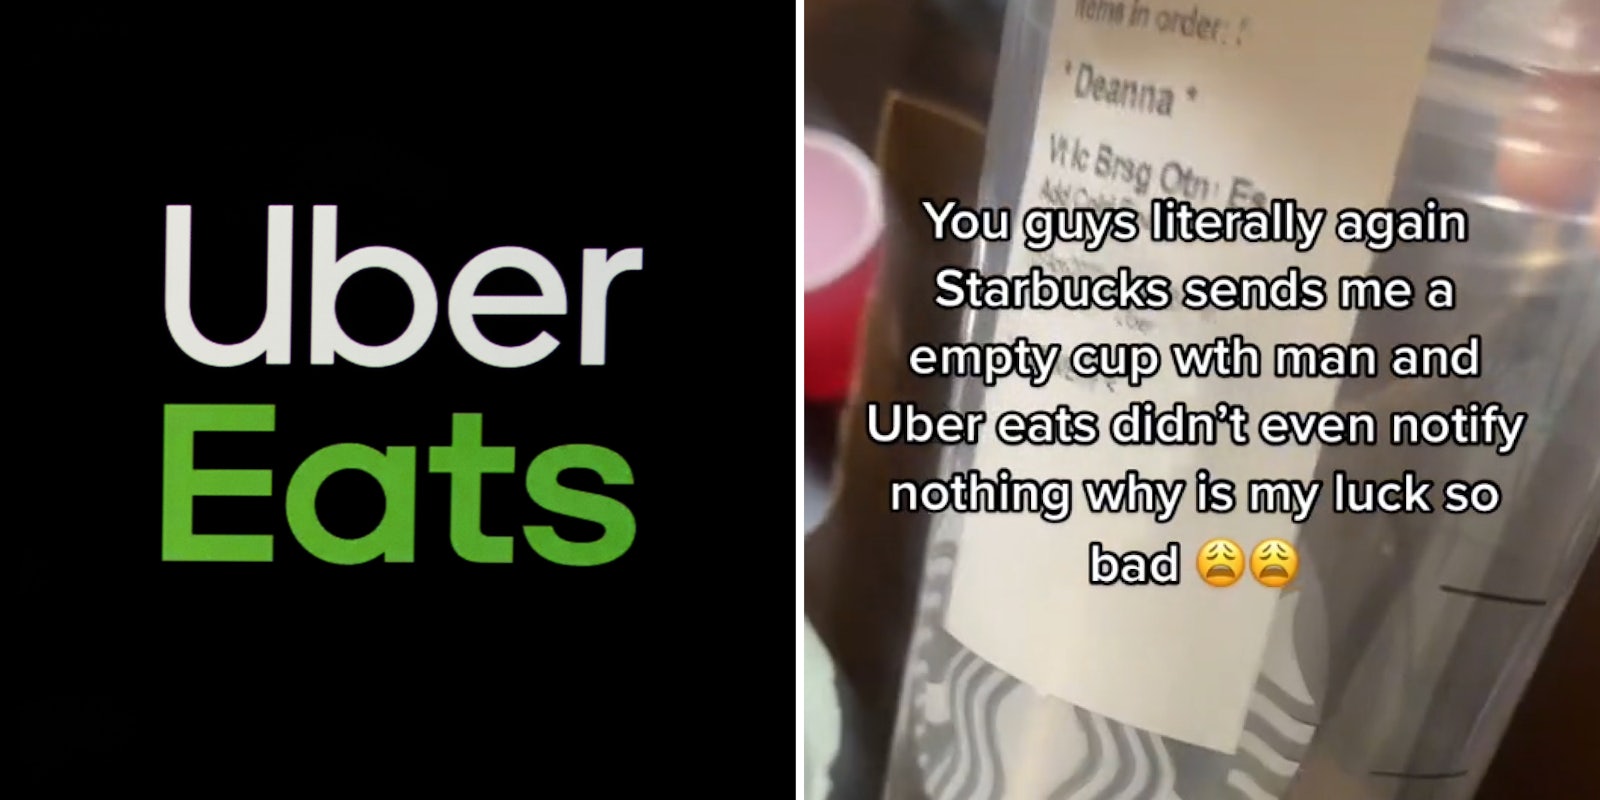 Uber Eats logo on black background (l) Starbucks cup empty in hand caption 'You guys literally again Starbucks sends me a empty cup with a man and Uber eats didn't even notify nothing why is my luck so bad' (r)